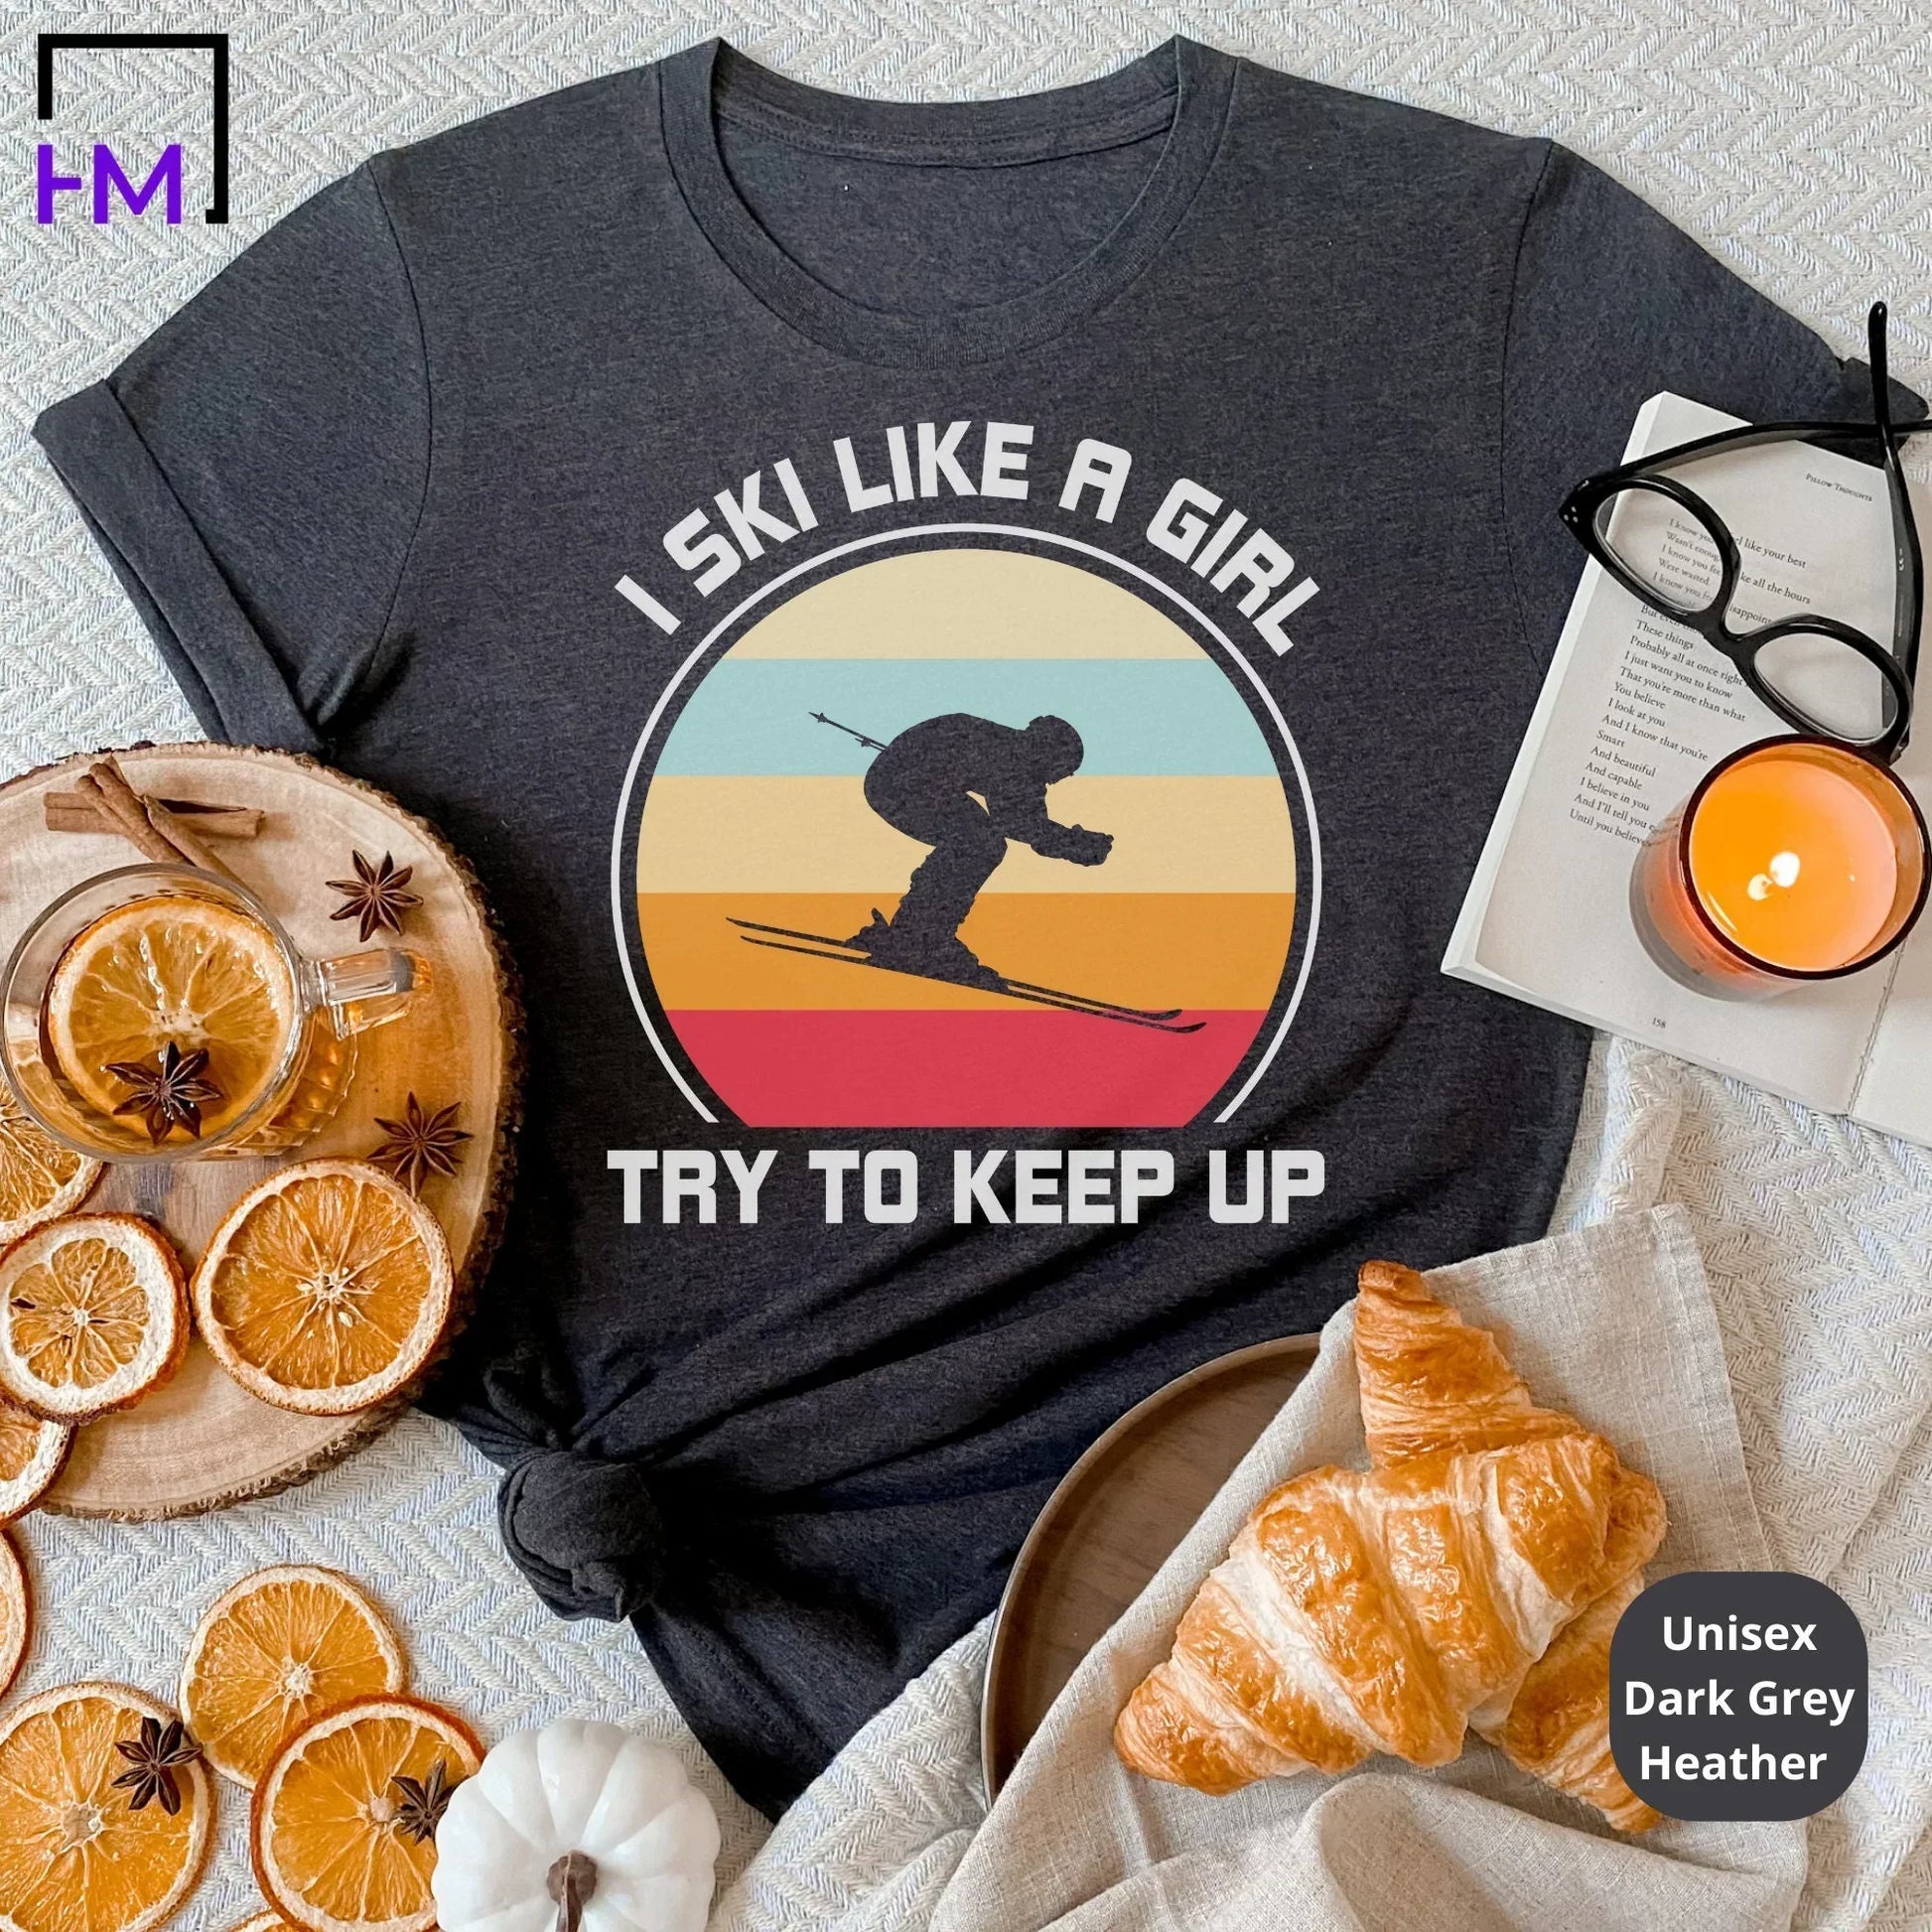 Retro Skiing Shirt | Great for Women Sports Enthusiast, New Lady Skiers, Beginners Experts, Retire Ski Lovers | Birthday Xmas Gift HMDesignStudioUS